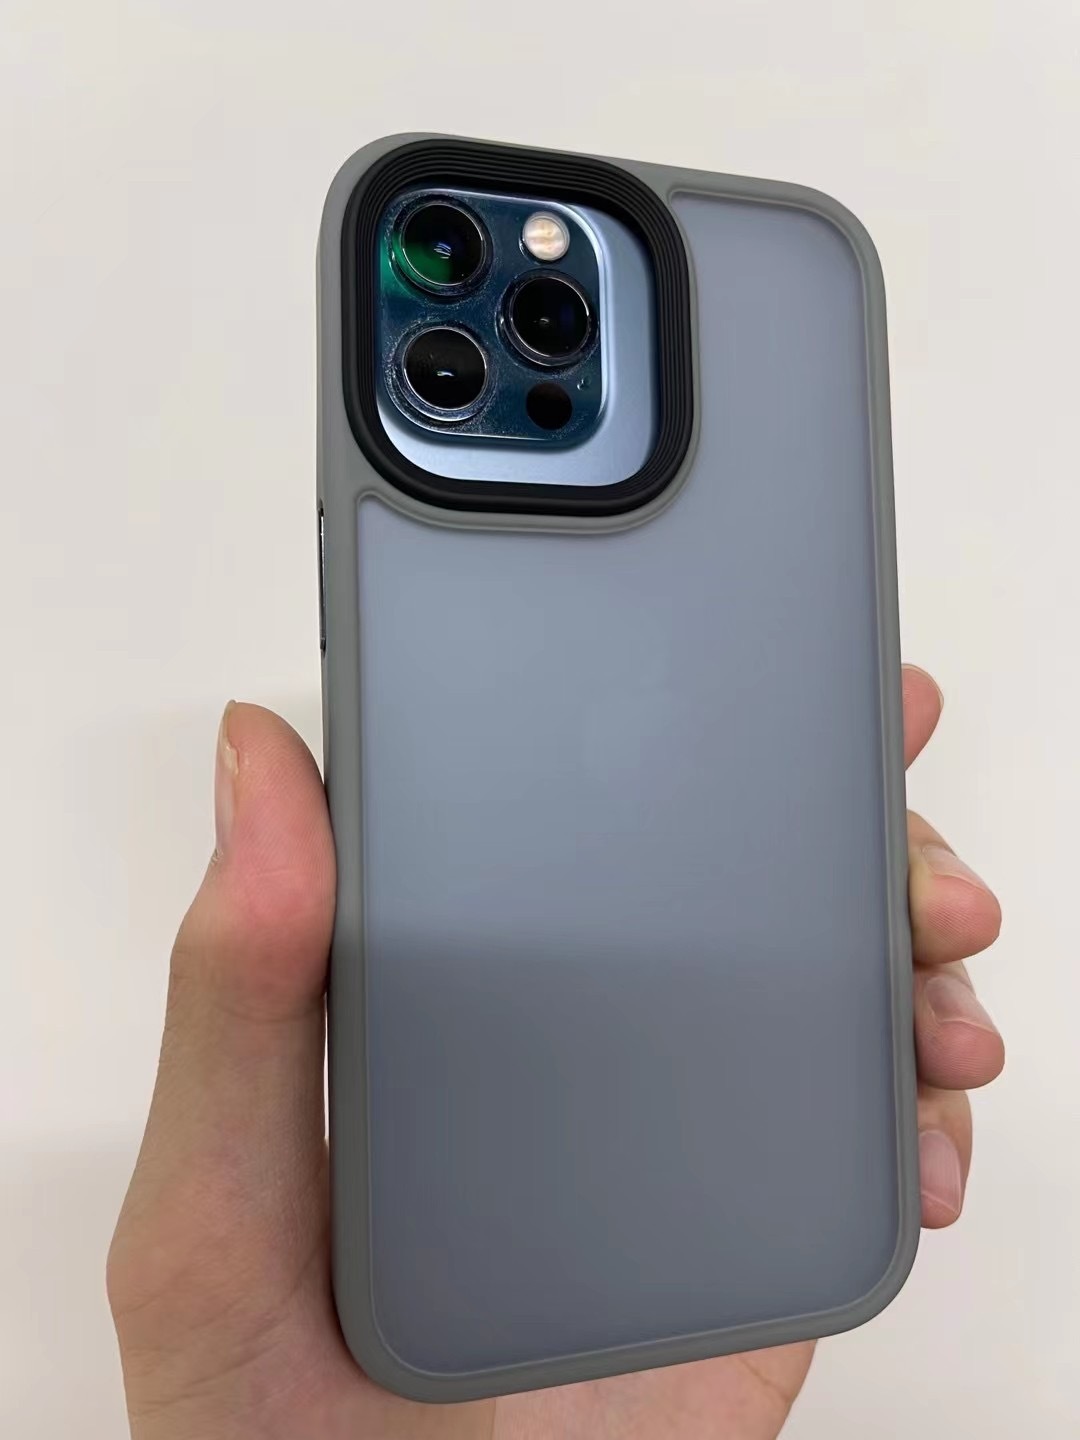 iPhone 13 Pro Protective Case Revealed Larger Camera Module On New